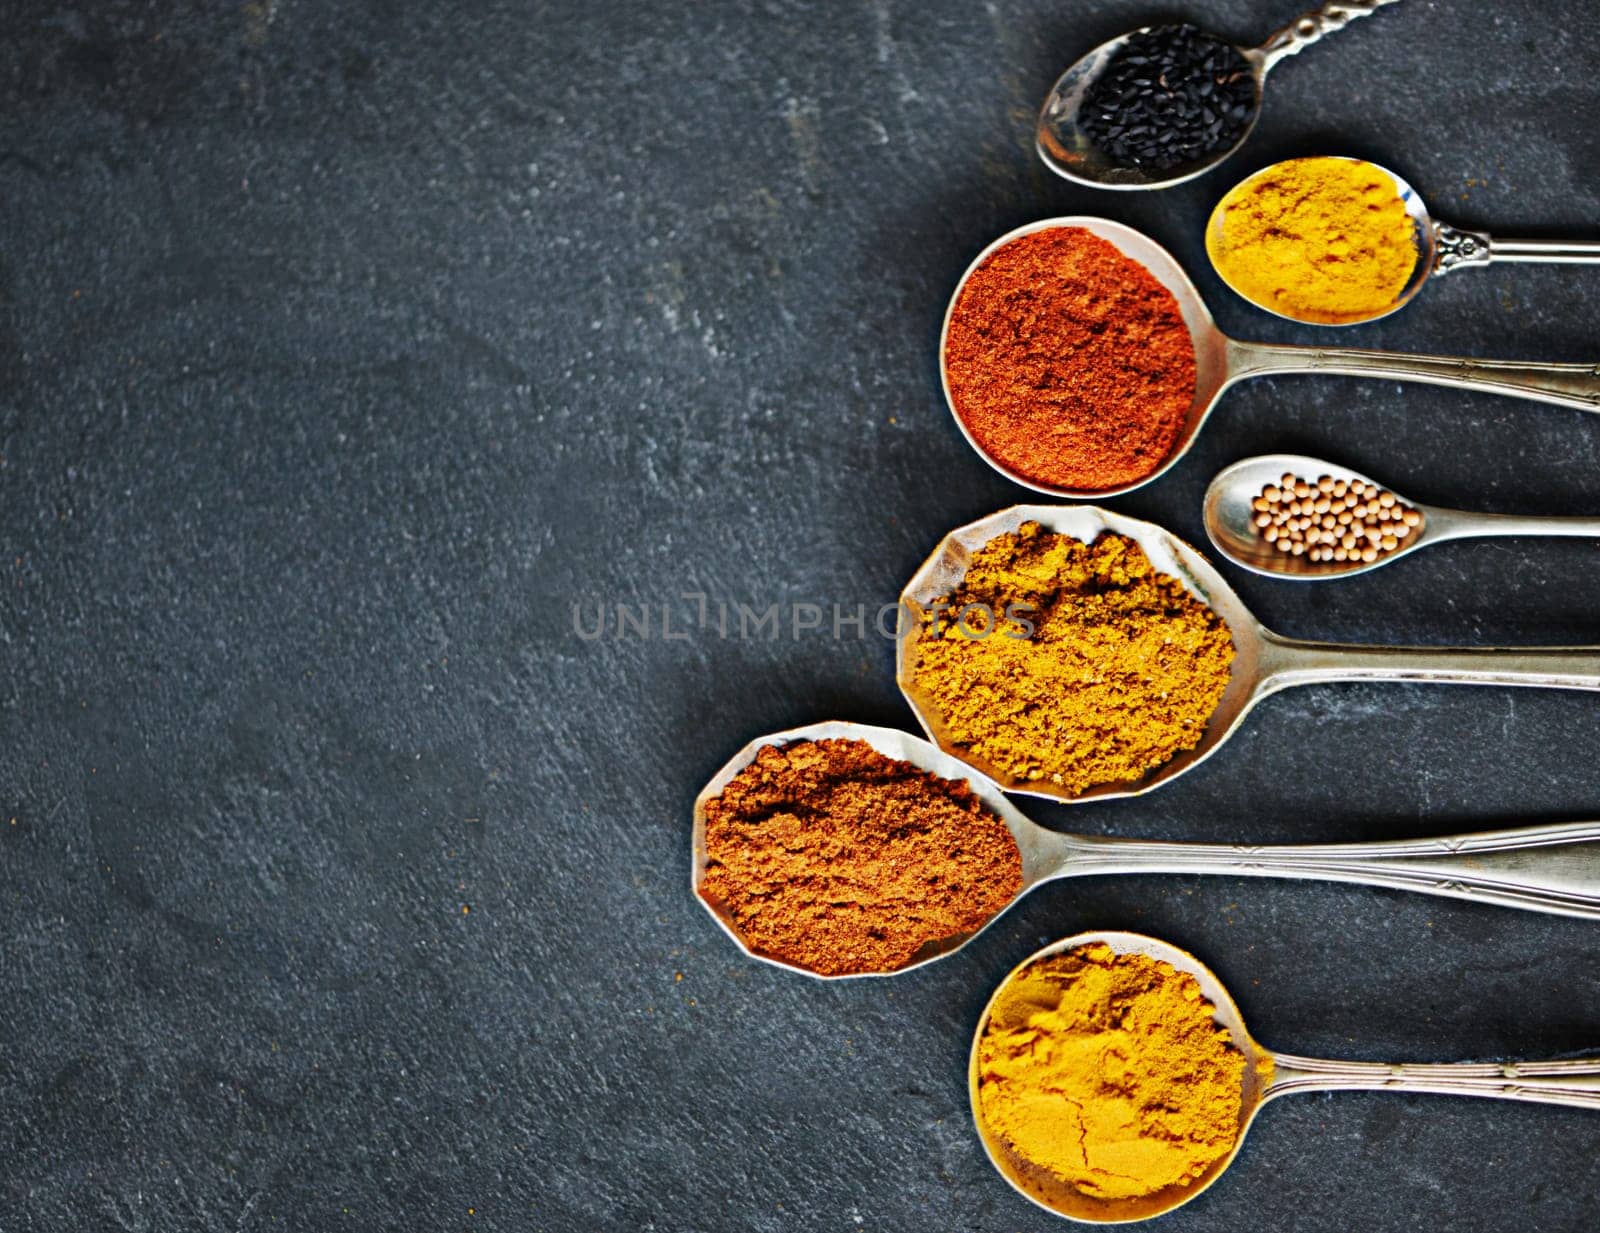 Spoon, powder and group of spices by dark background for cooking dinner, health and nutrition. Turmeric, chilli and seeds on black surface with zoom for Oriental food, antioxidant and spicy cuisine.